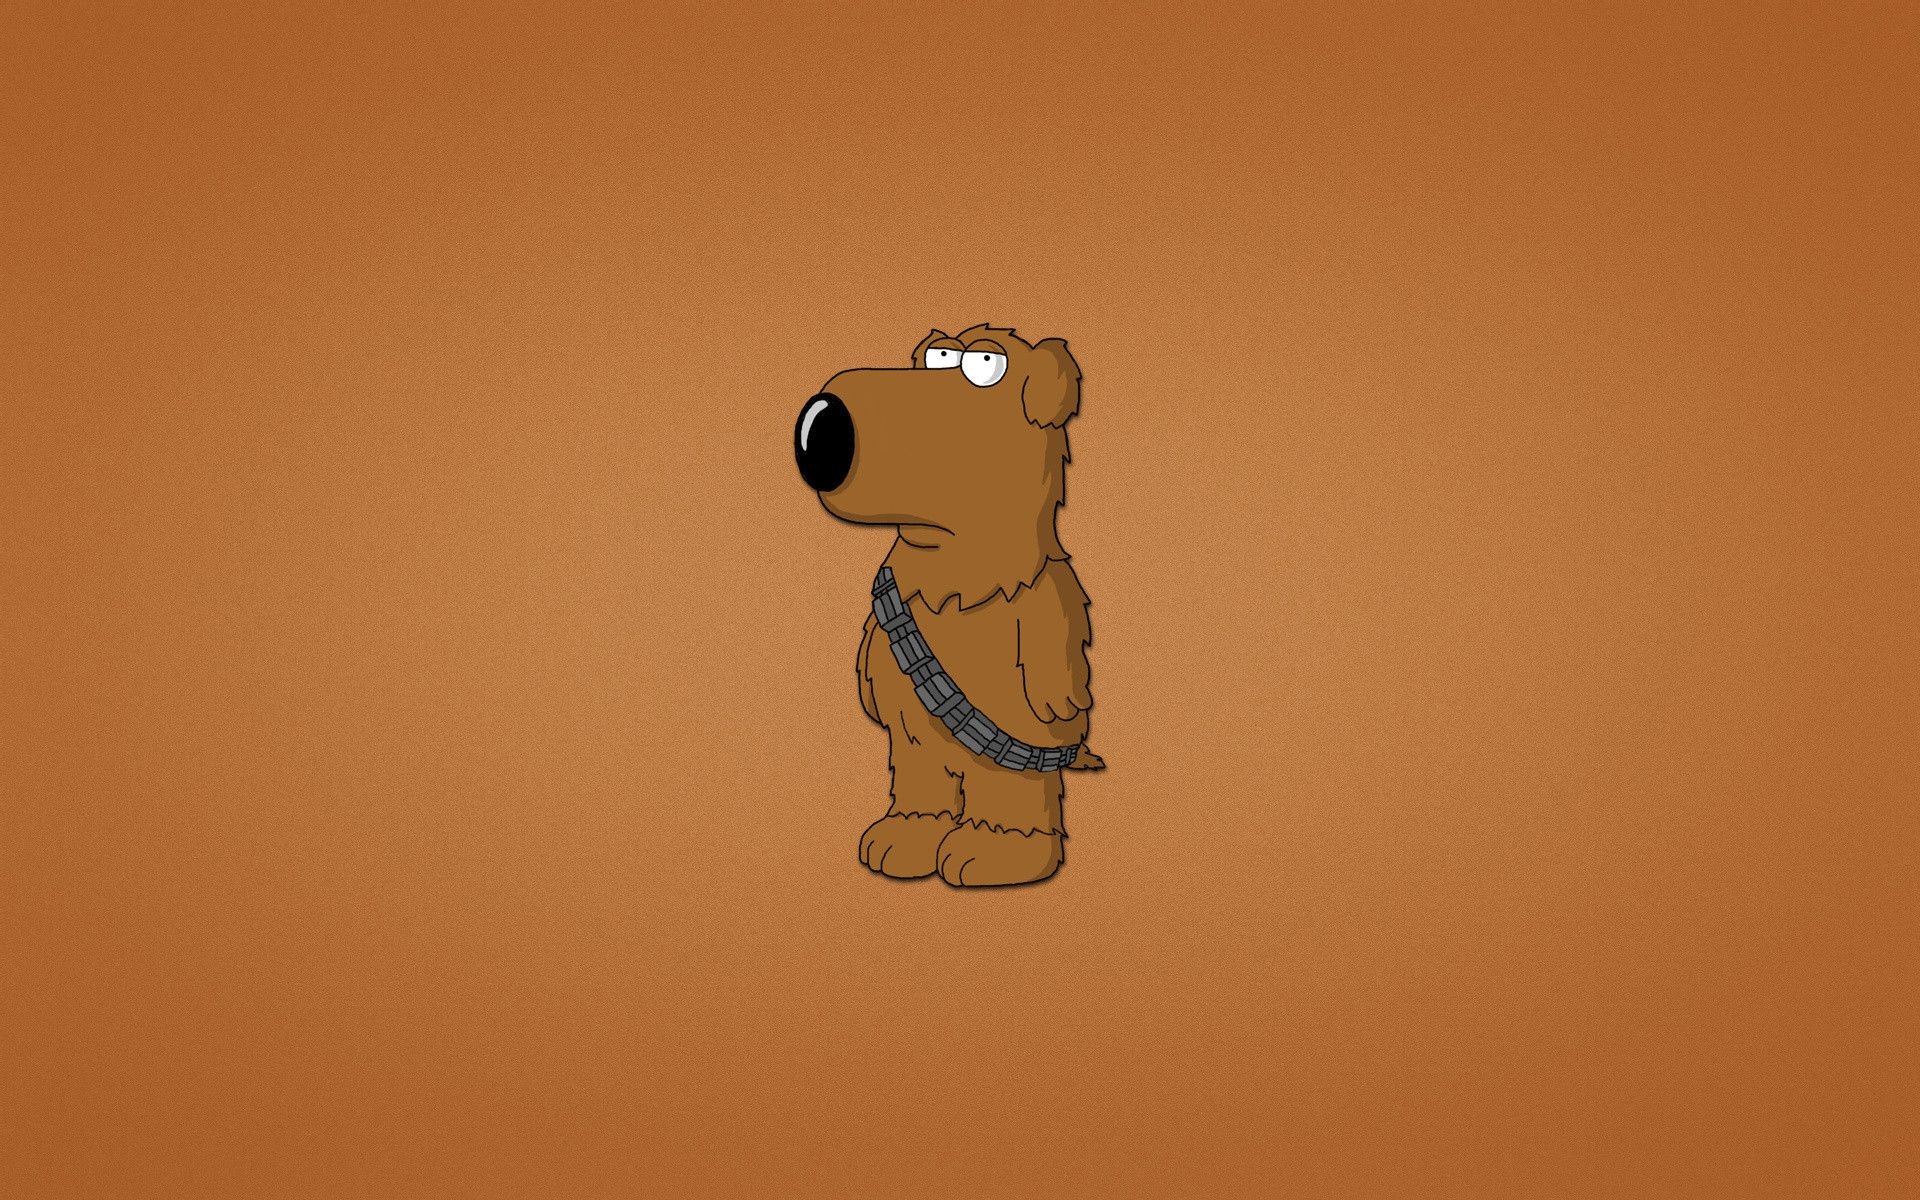 1920x1200 Free Best Family Guy Star Wars Images on your Computer